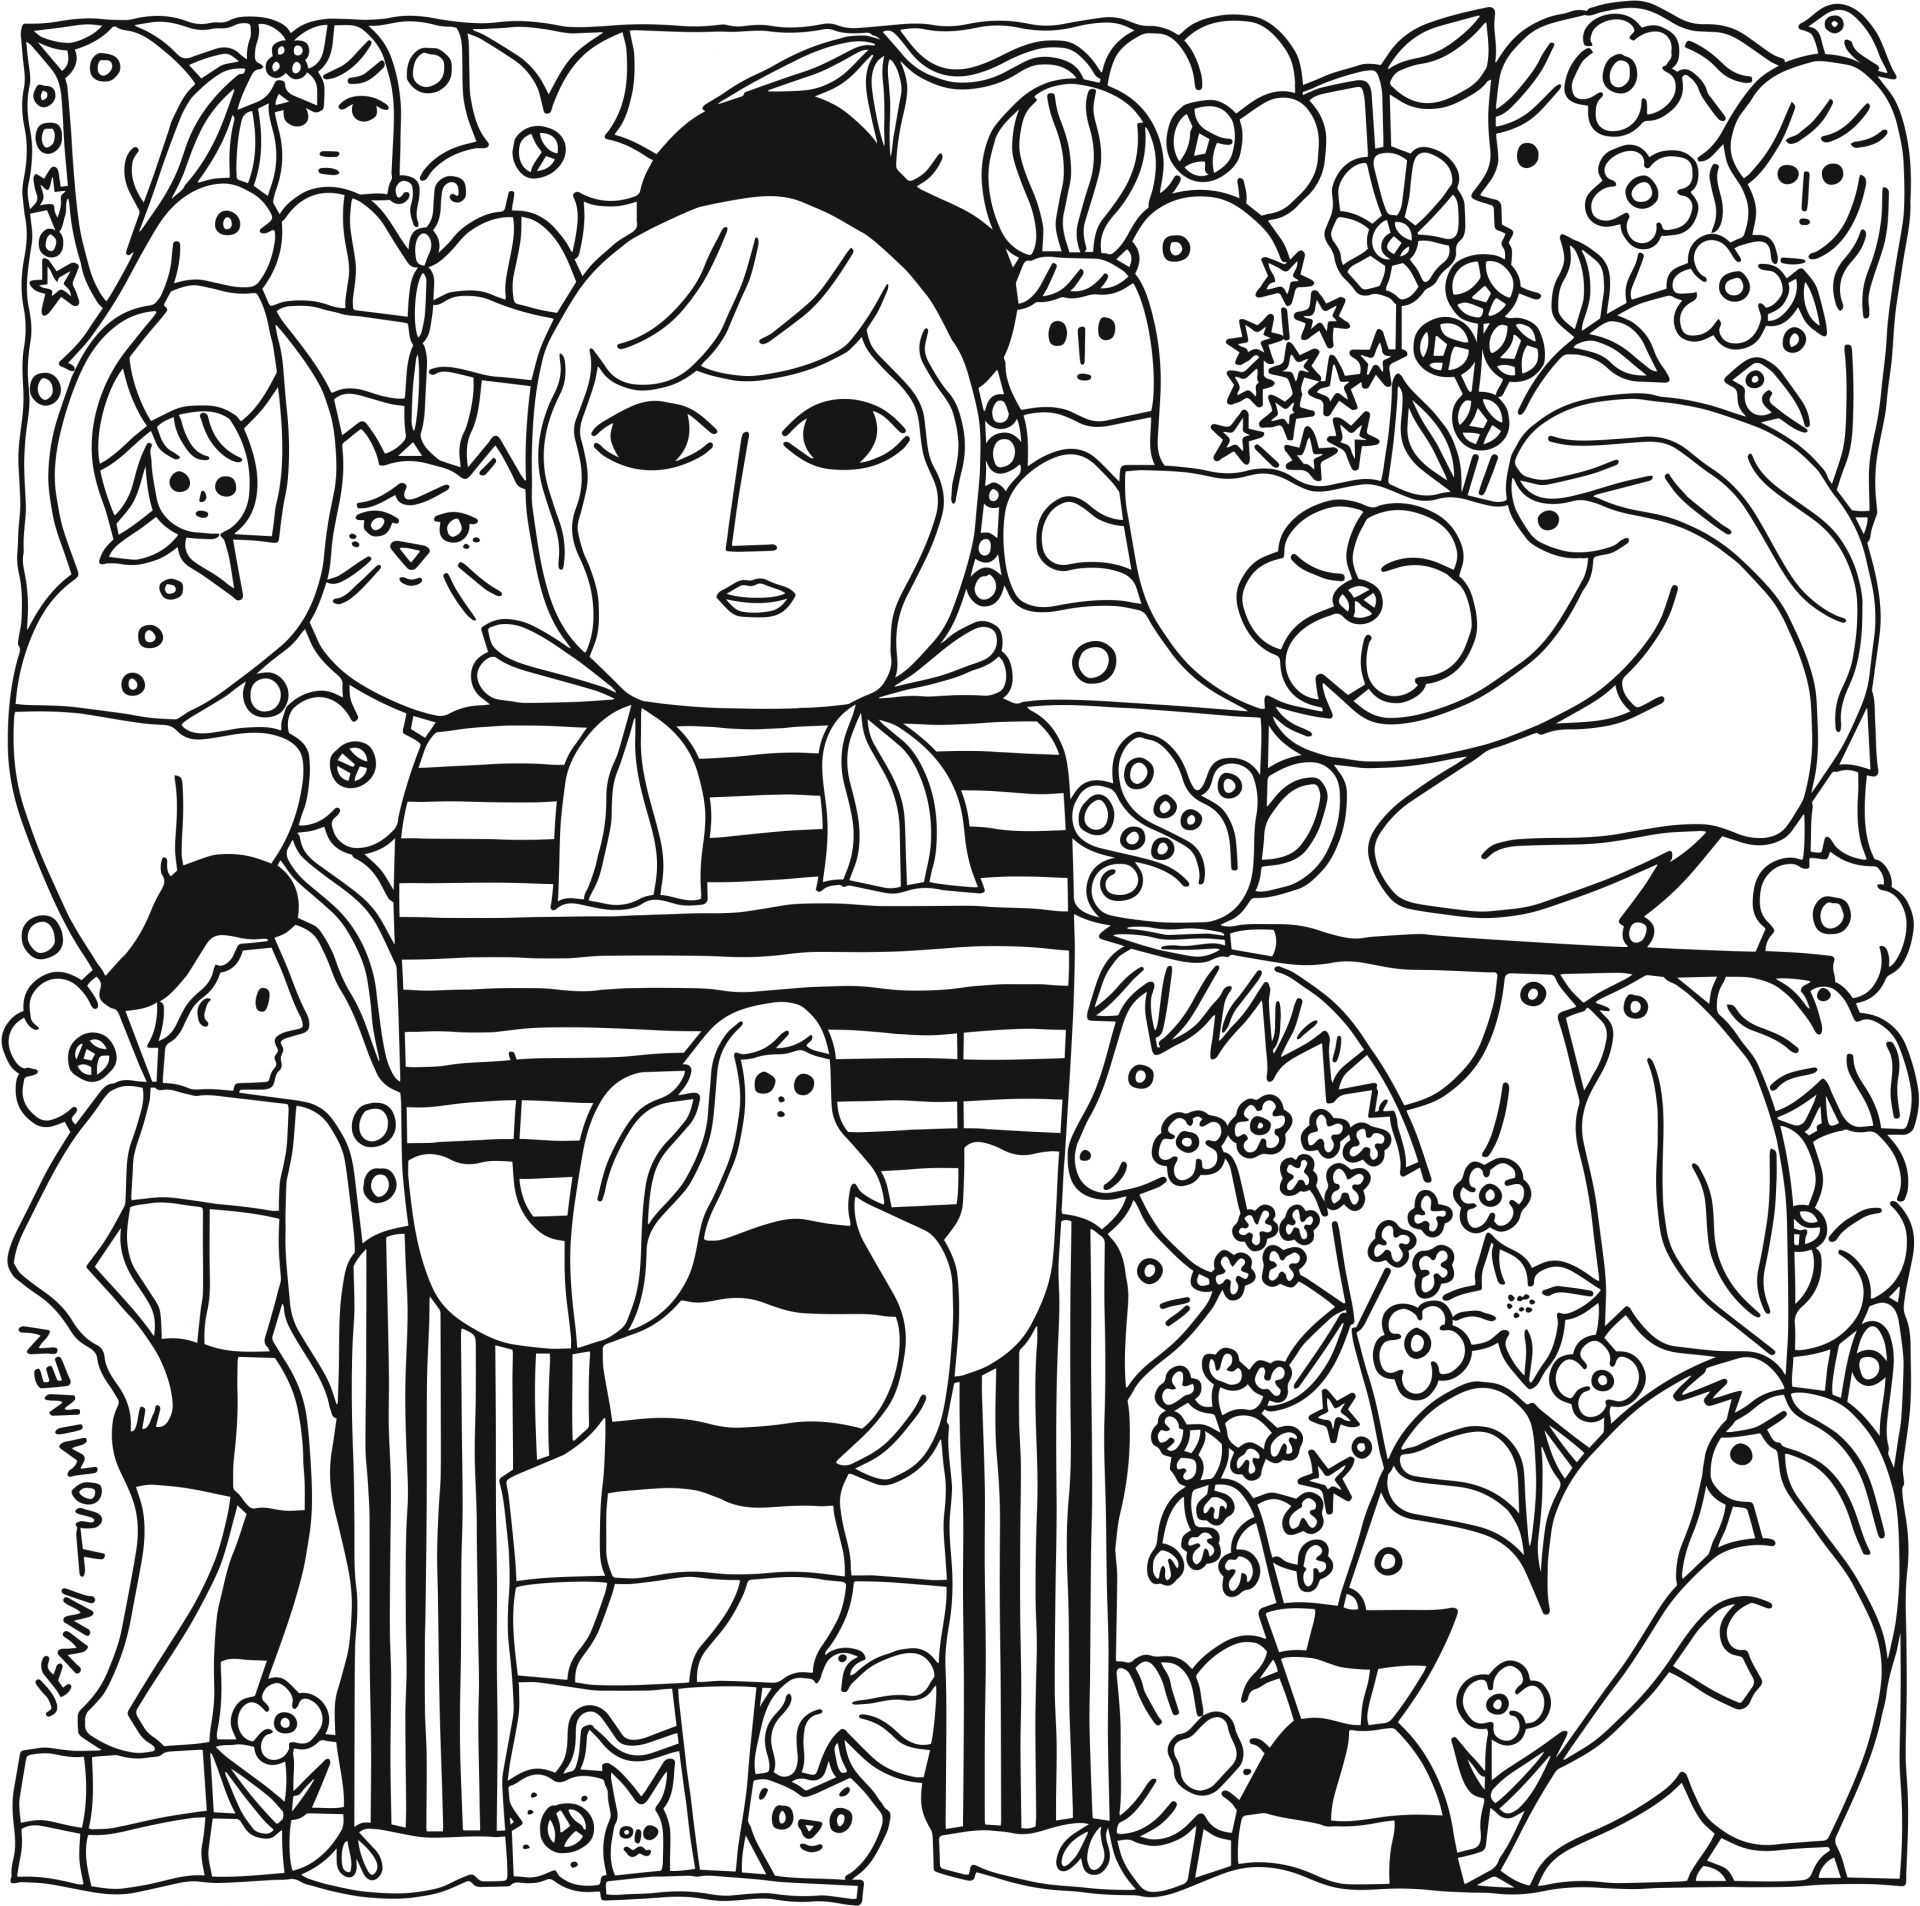 Black and white illustration with human and animal figures by the artist Jenno Tuominen for Konstrundan 2022